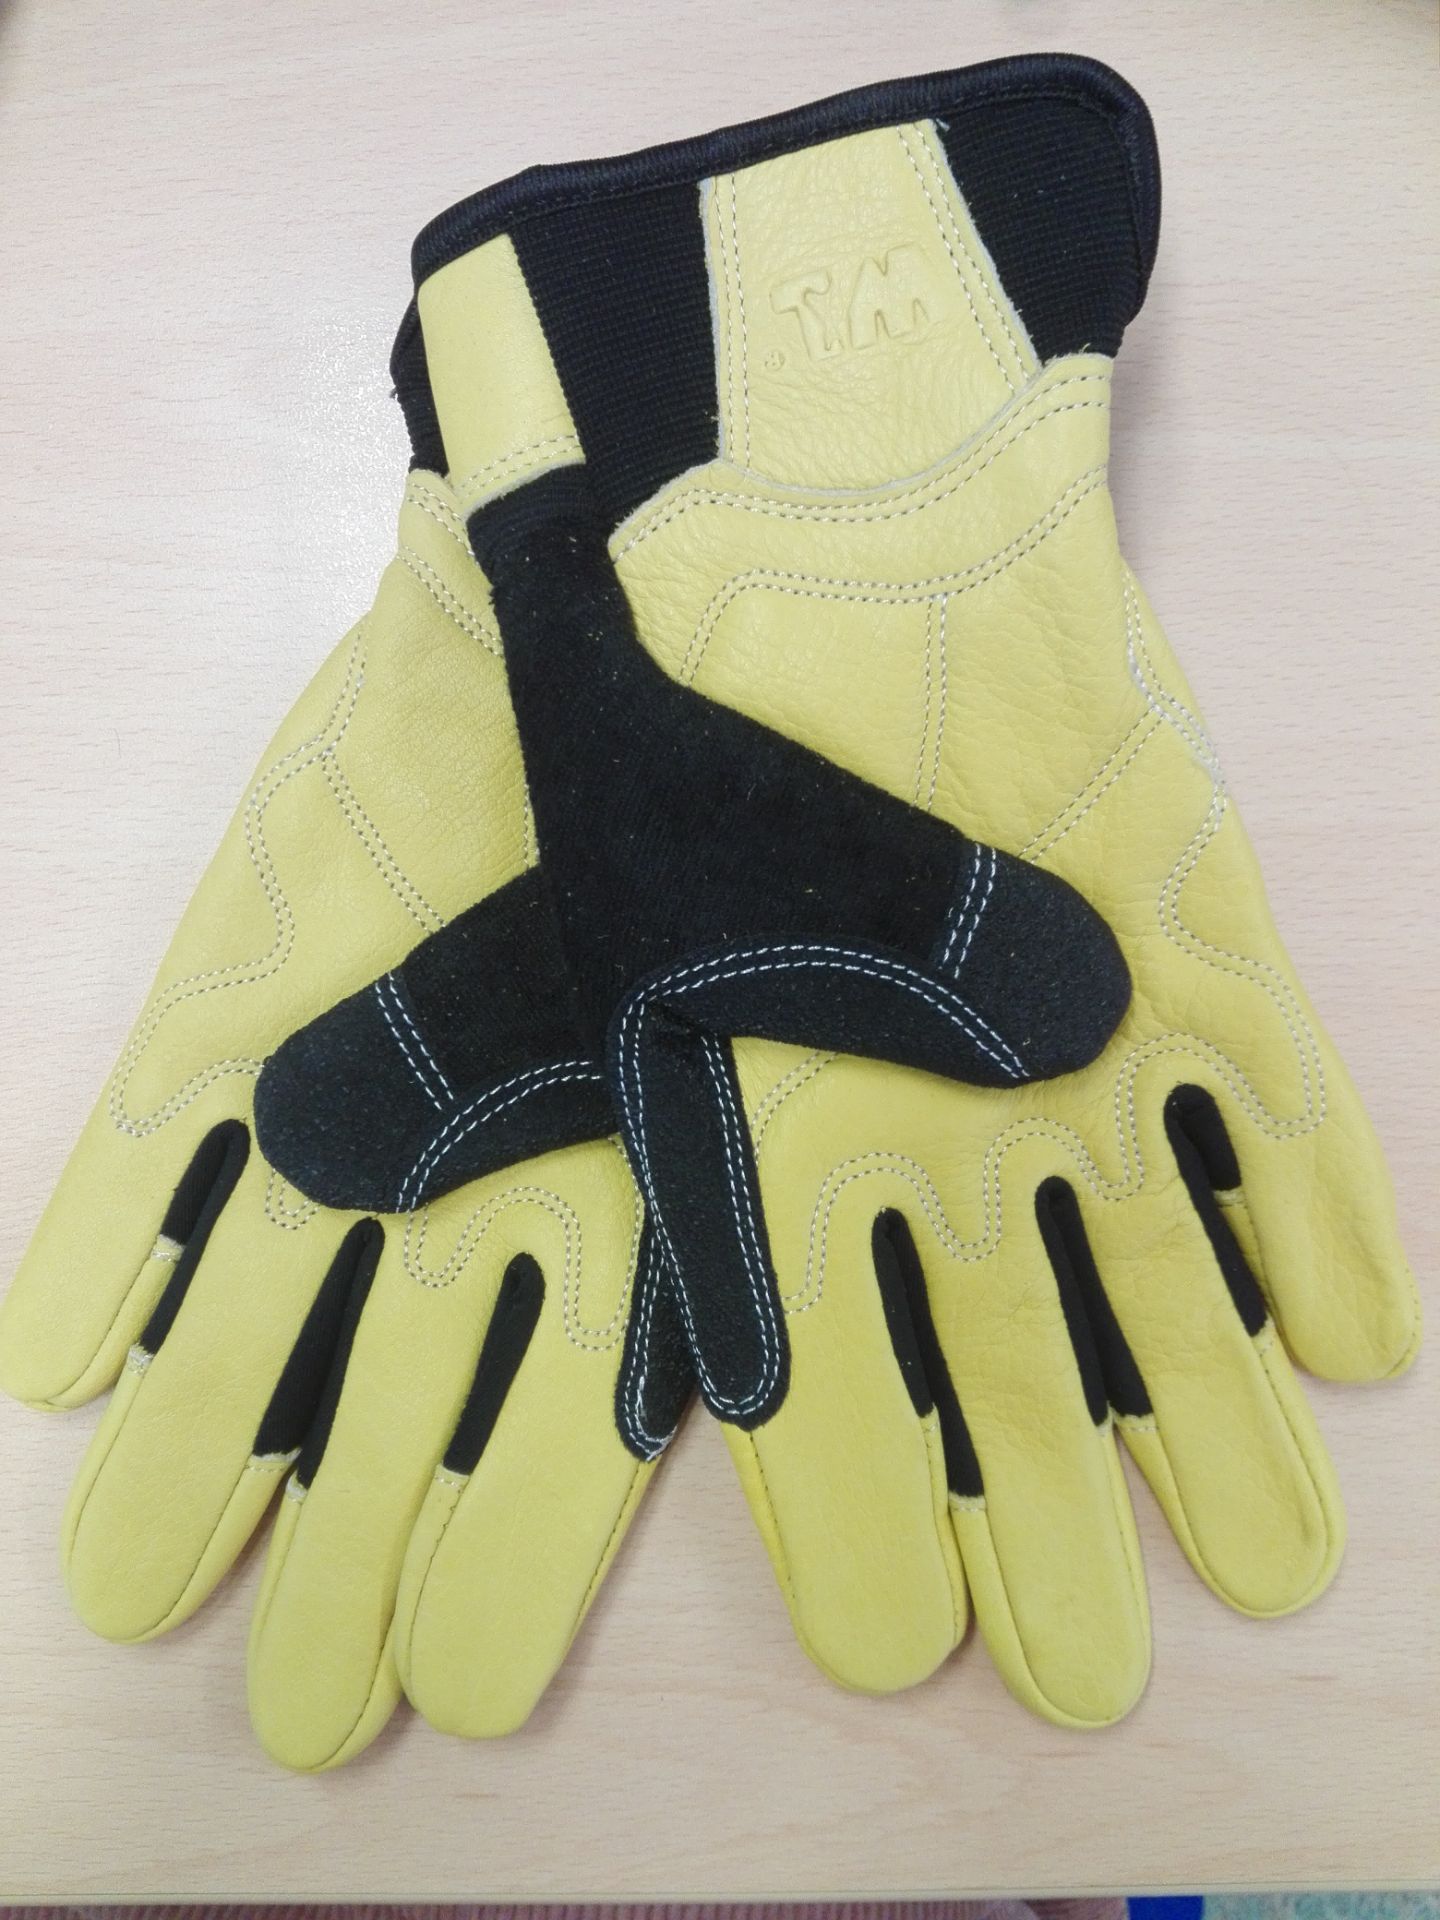 Premium Leather Safety Gloves - Image 4 of 4